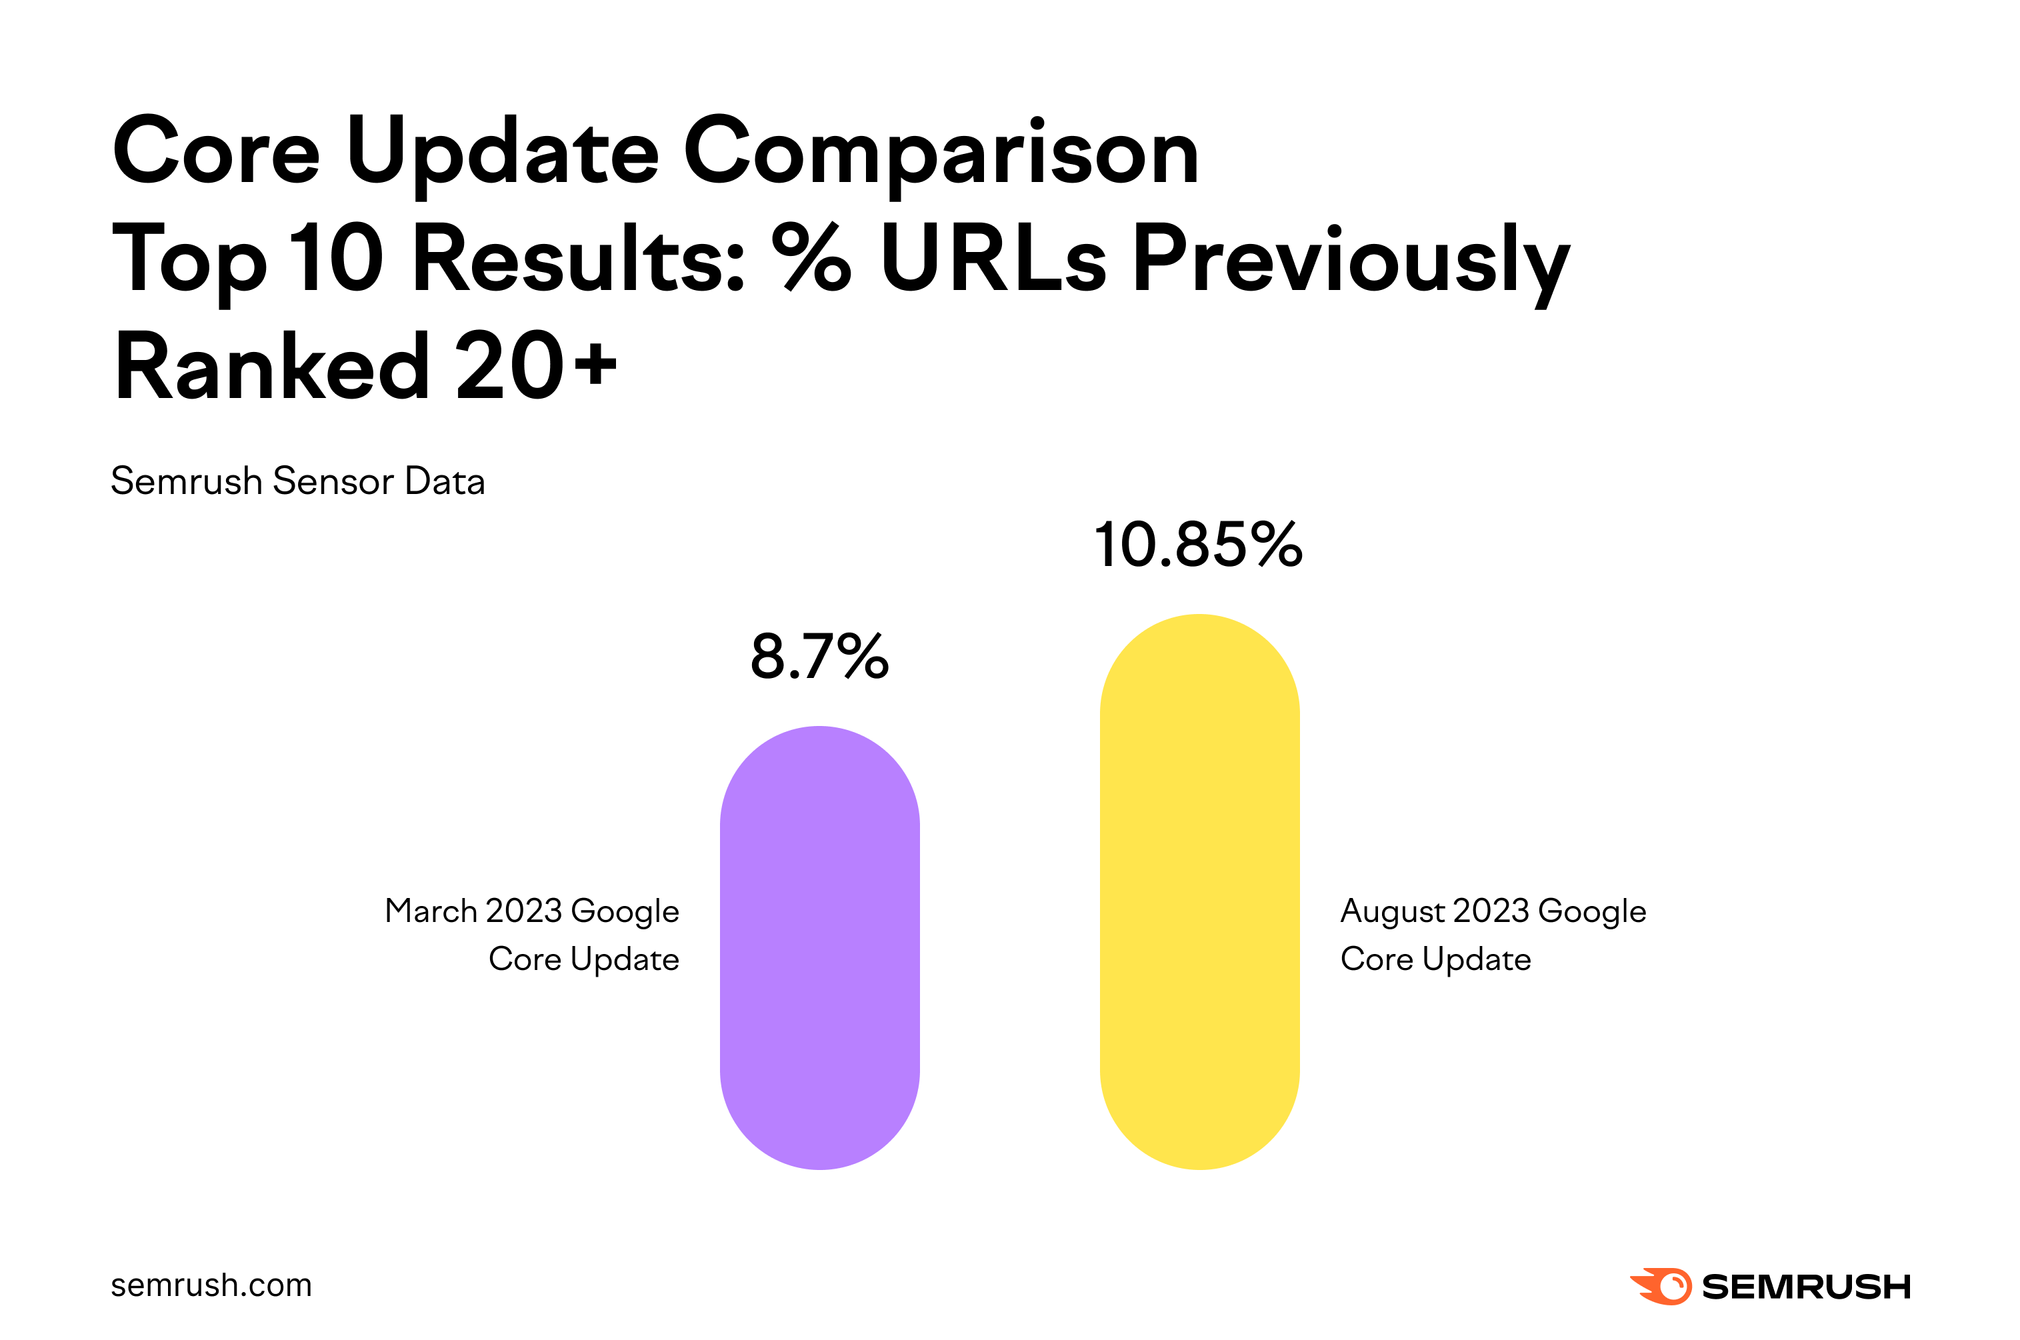 Graph showing the percentages of URLs that moved from position 20 or beyond up to the top 10 during the March and August 2023 core updates.